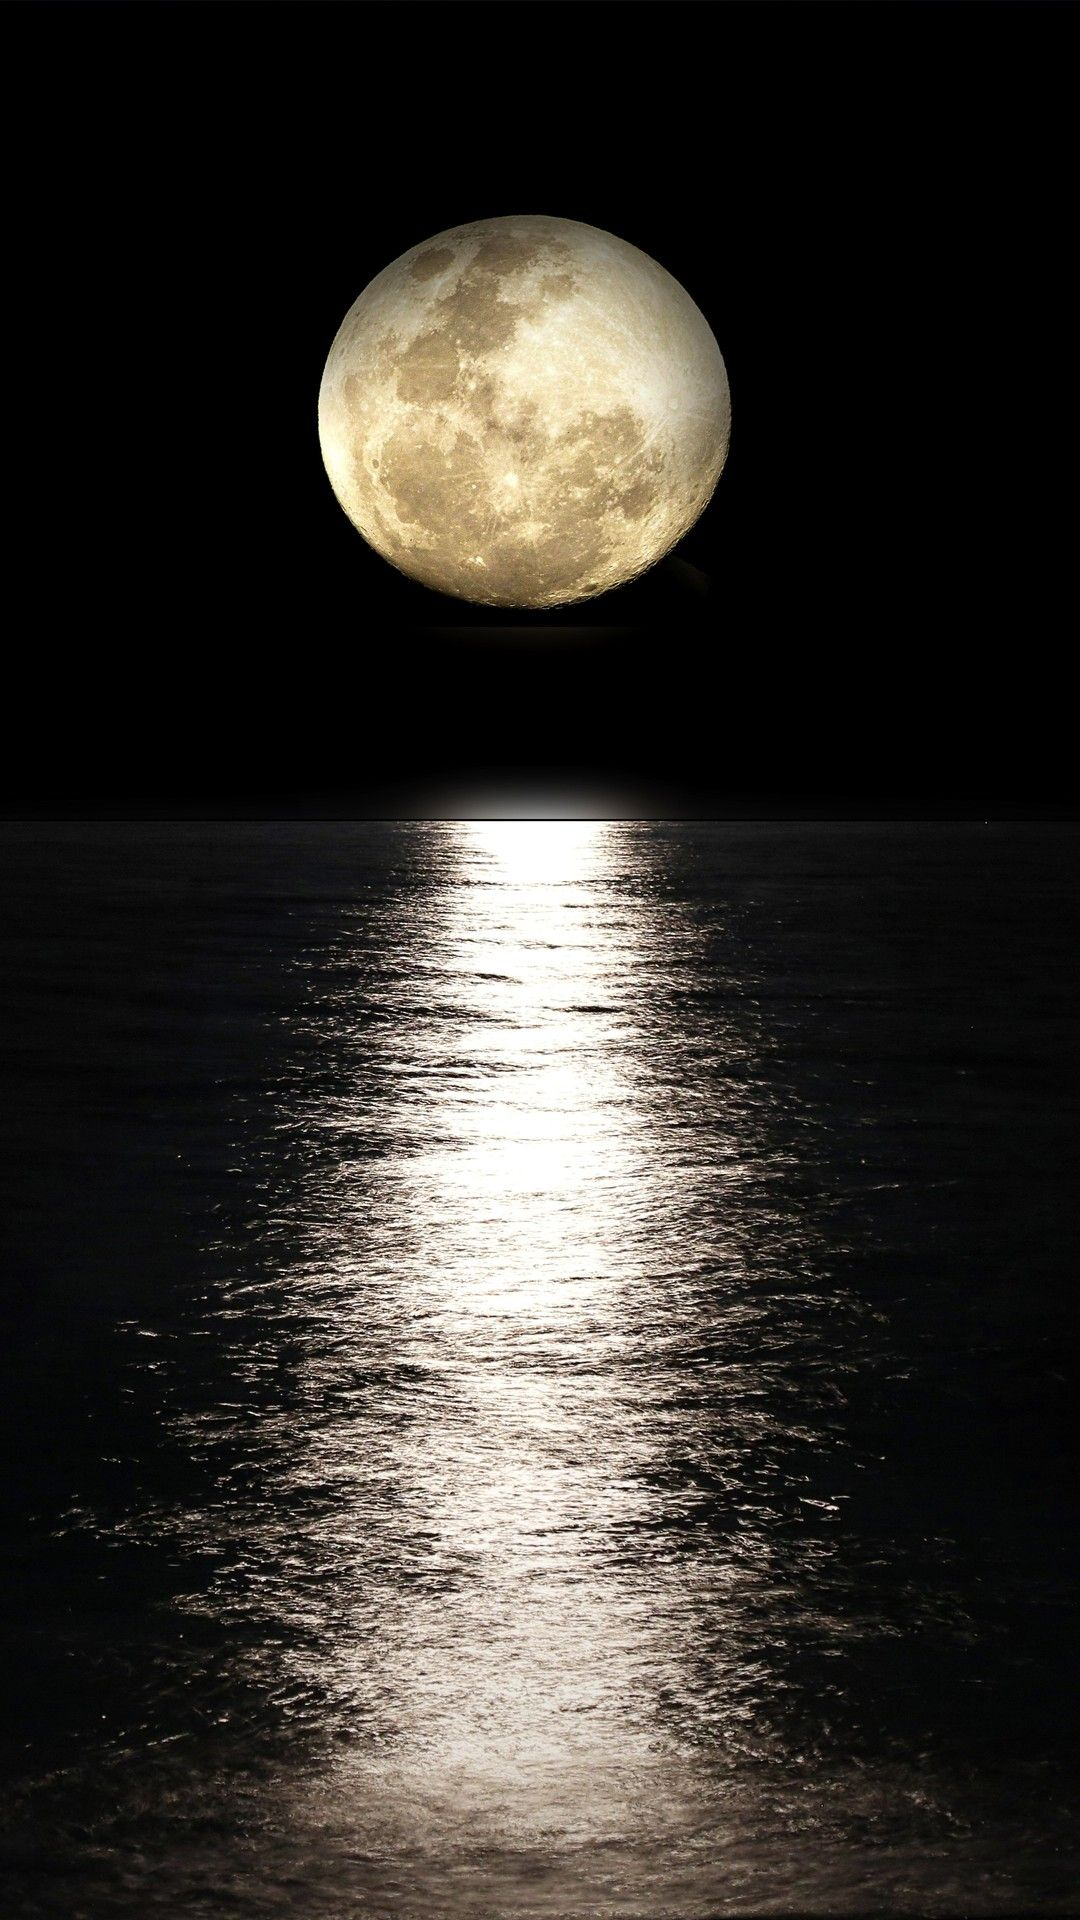 1080x1920 Dark Night Moon Reflection In Sea 5k In Resolution | Moon photography, Moon pictures, M